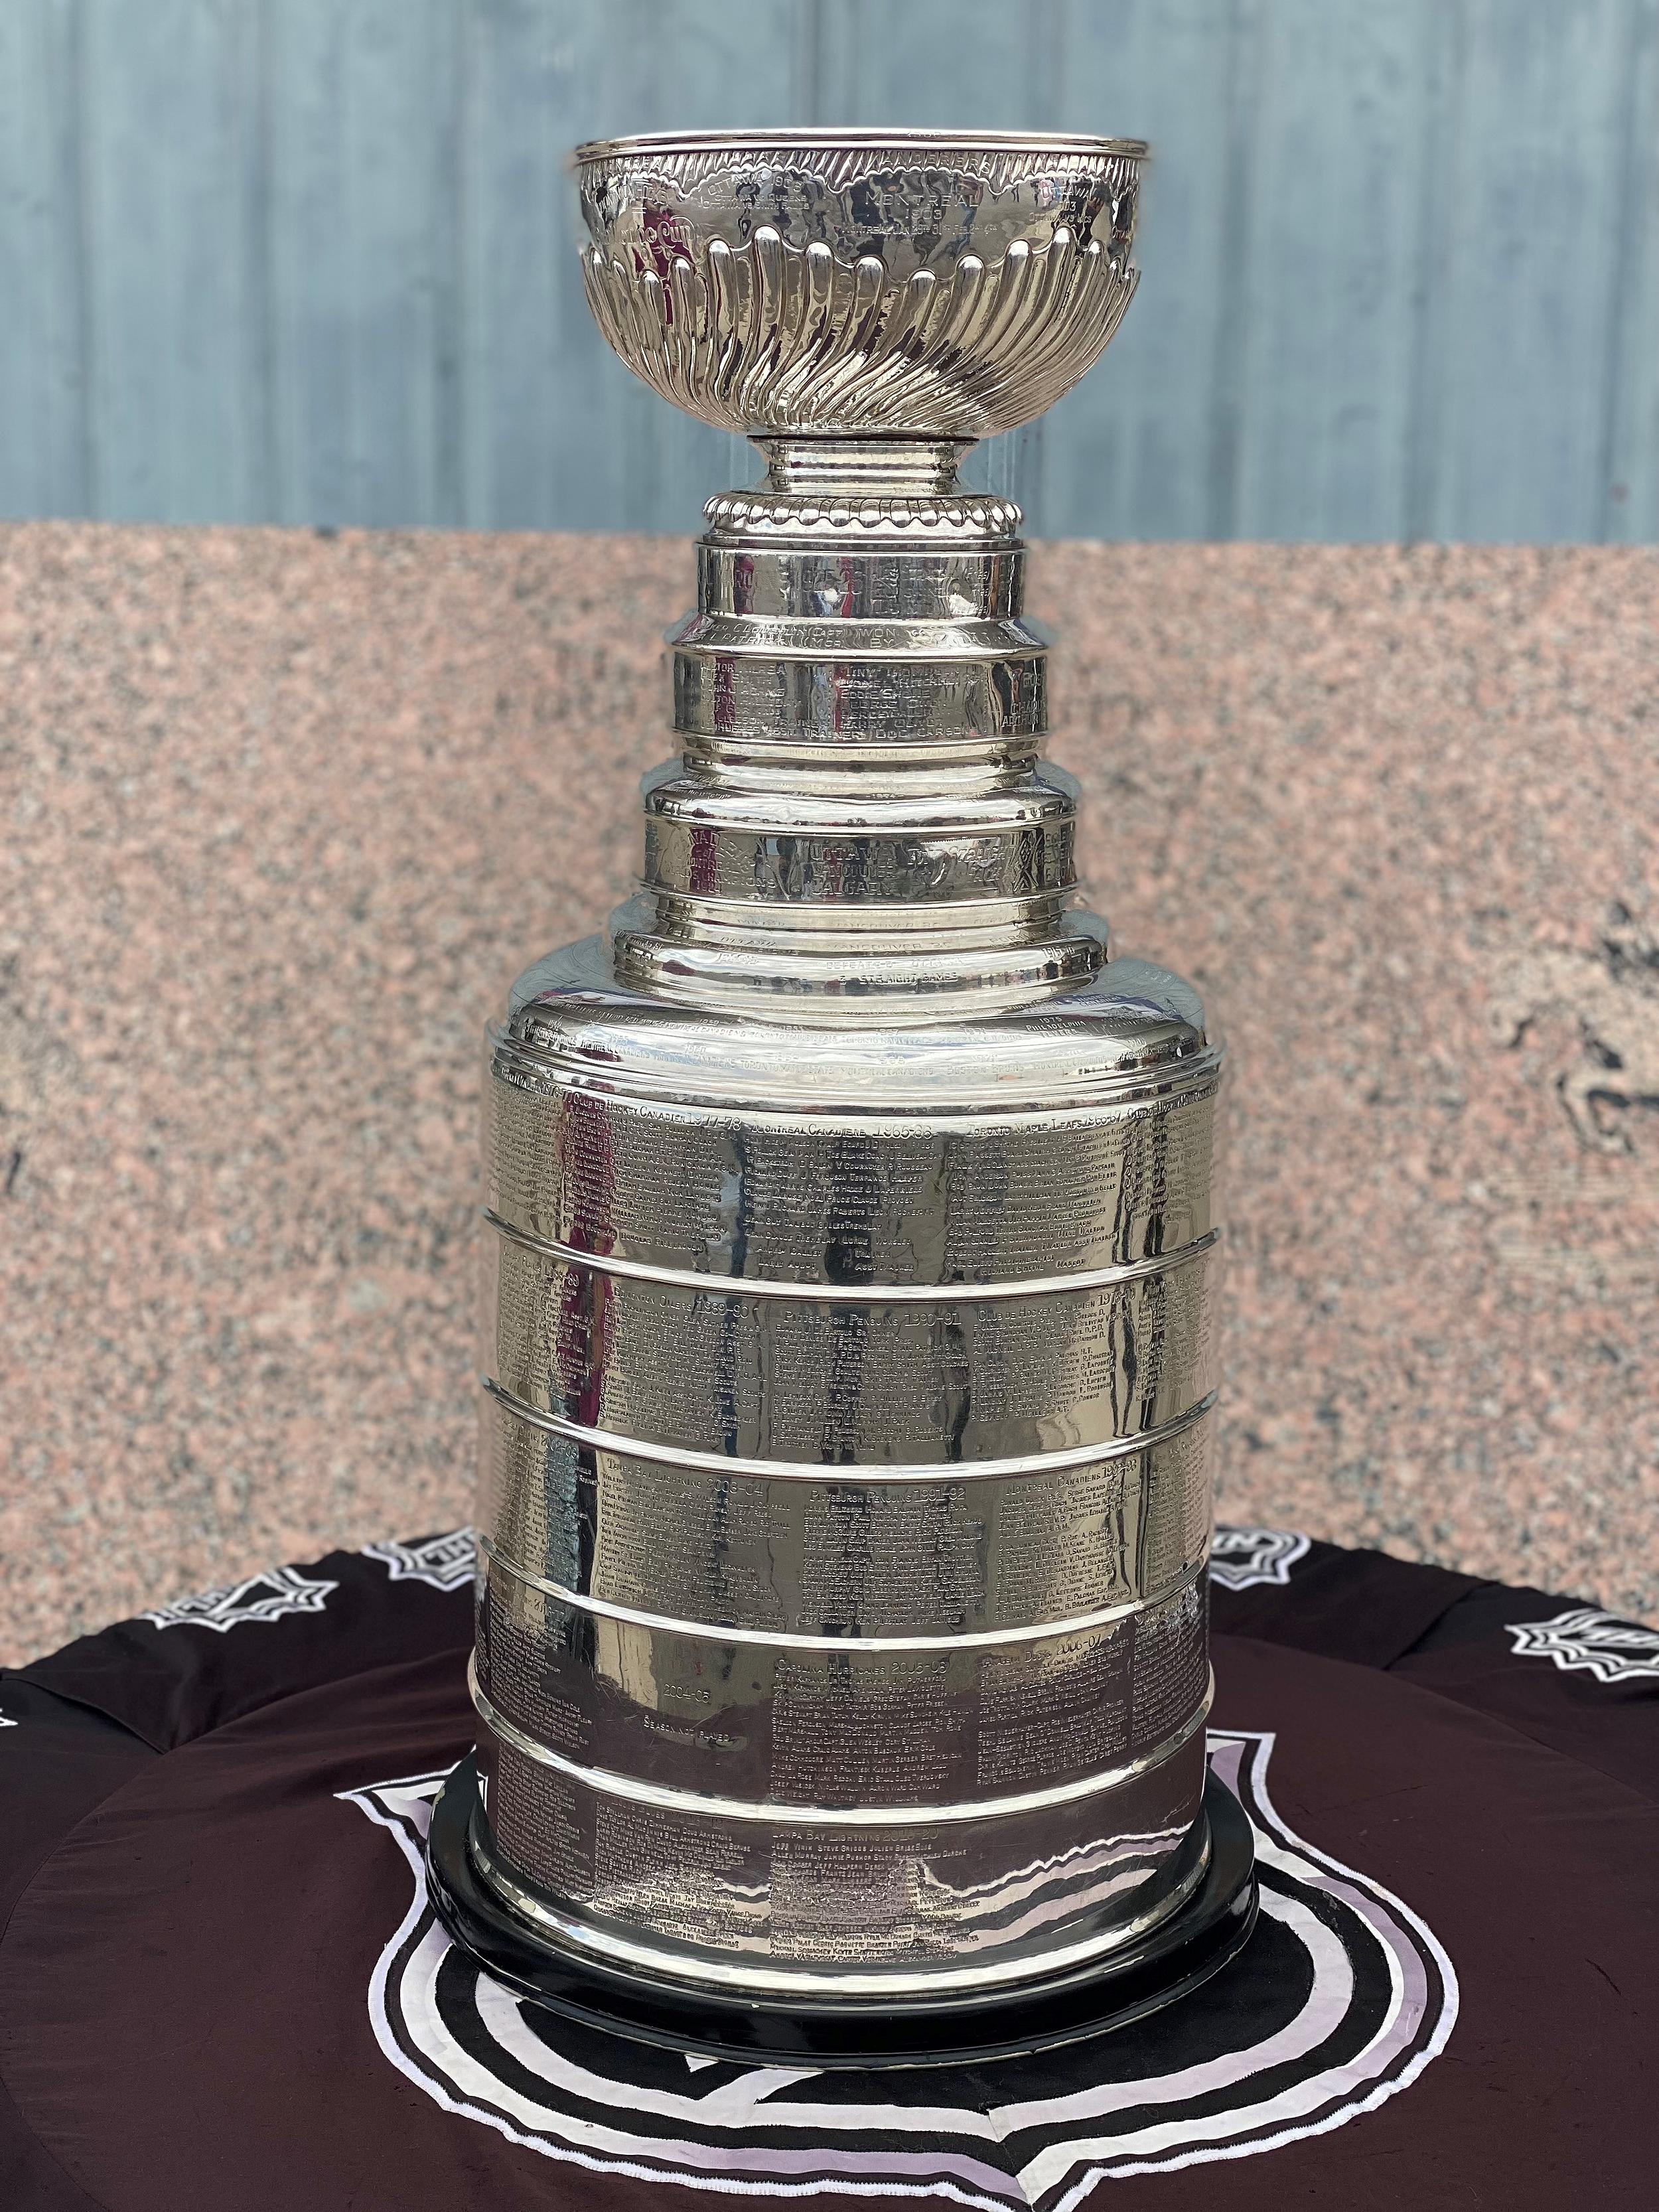 The Stanley Cup Dominion Hockey Challenge Cup